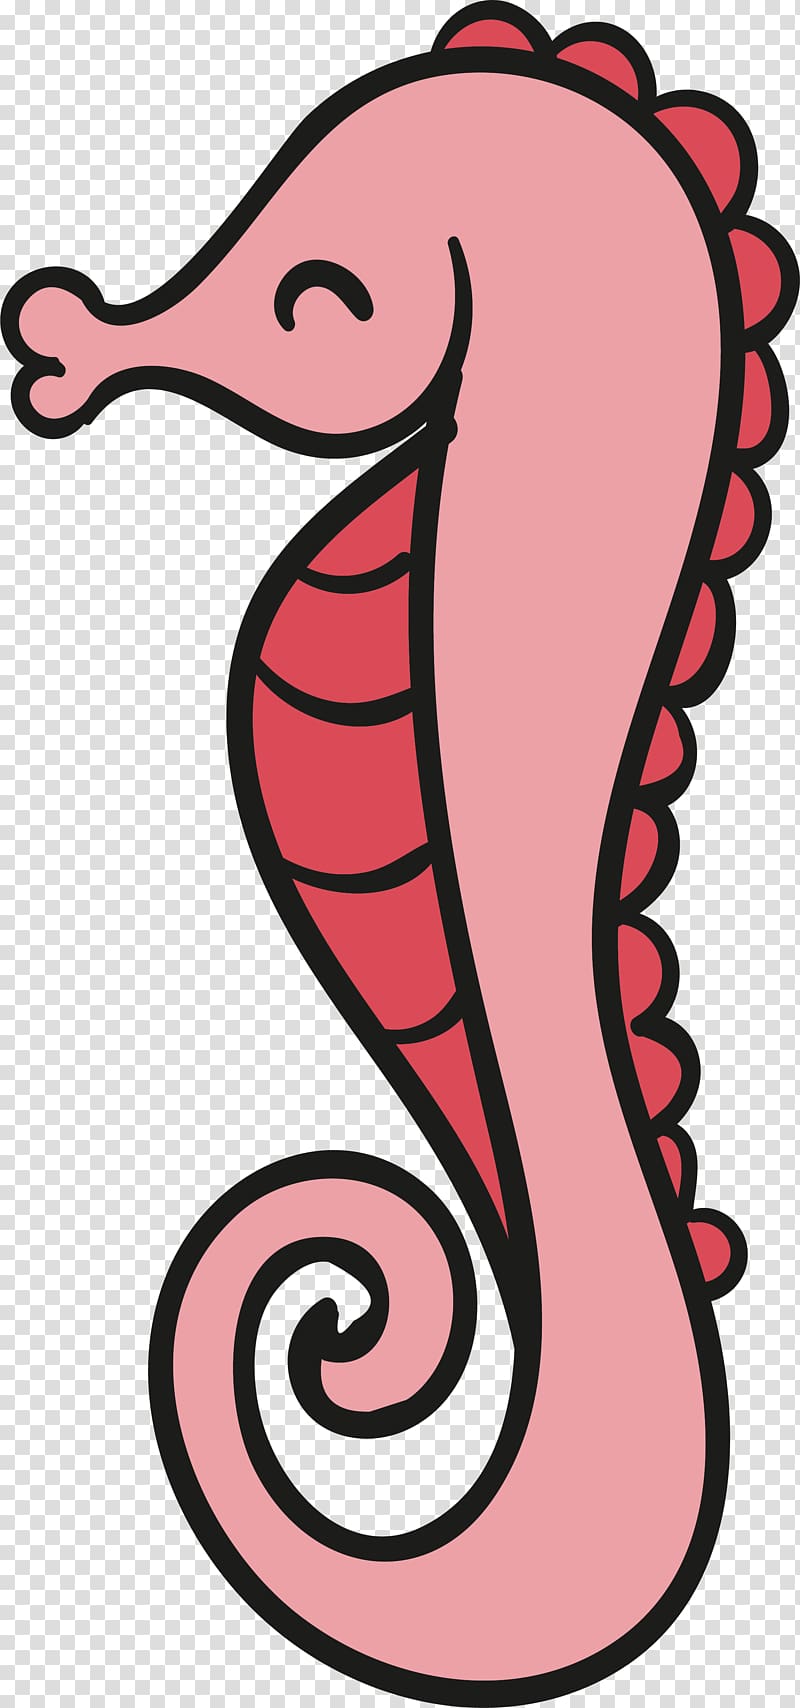 Seahorse Cartoon Animation Drawing, Cartoon seahorse design transparent background PNG clipart